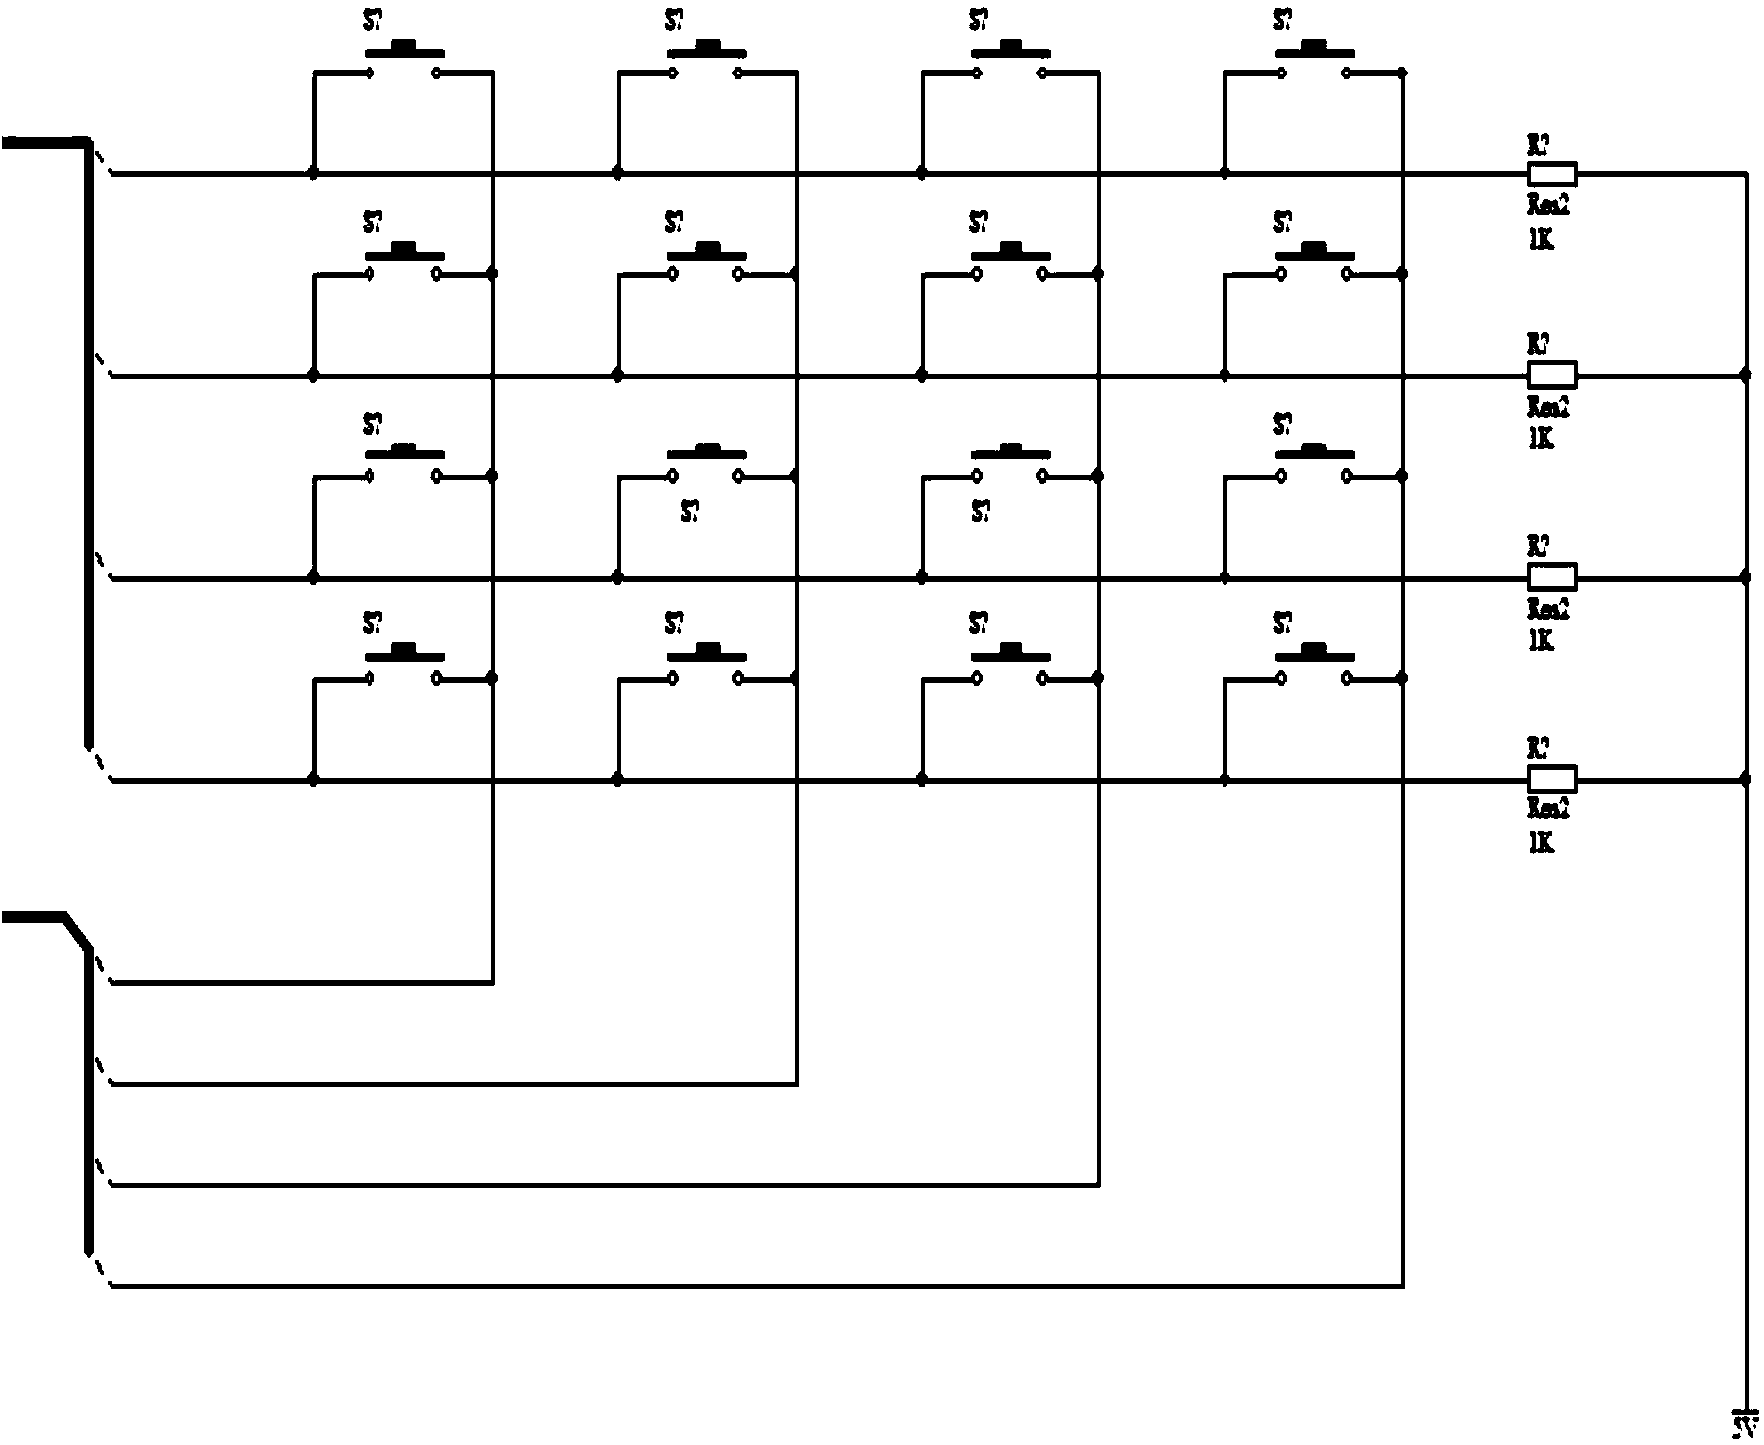 Driving control system of intelligent isolation switch of micro power grid